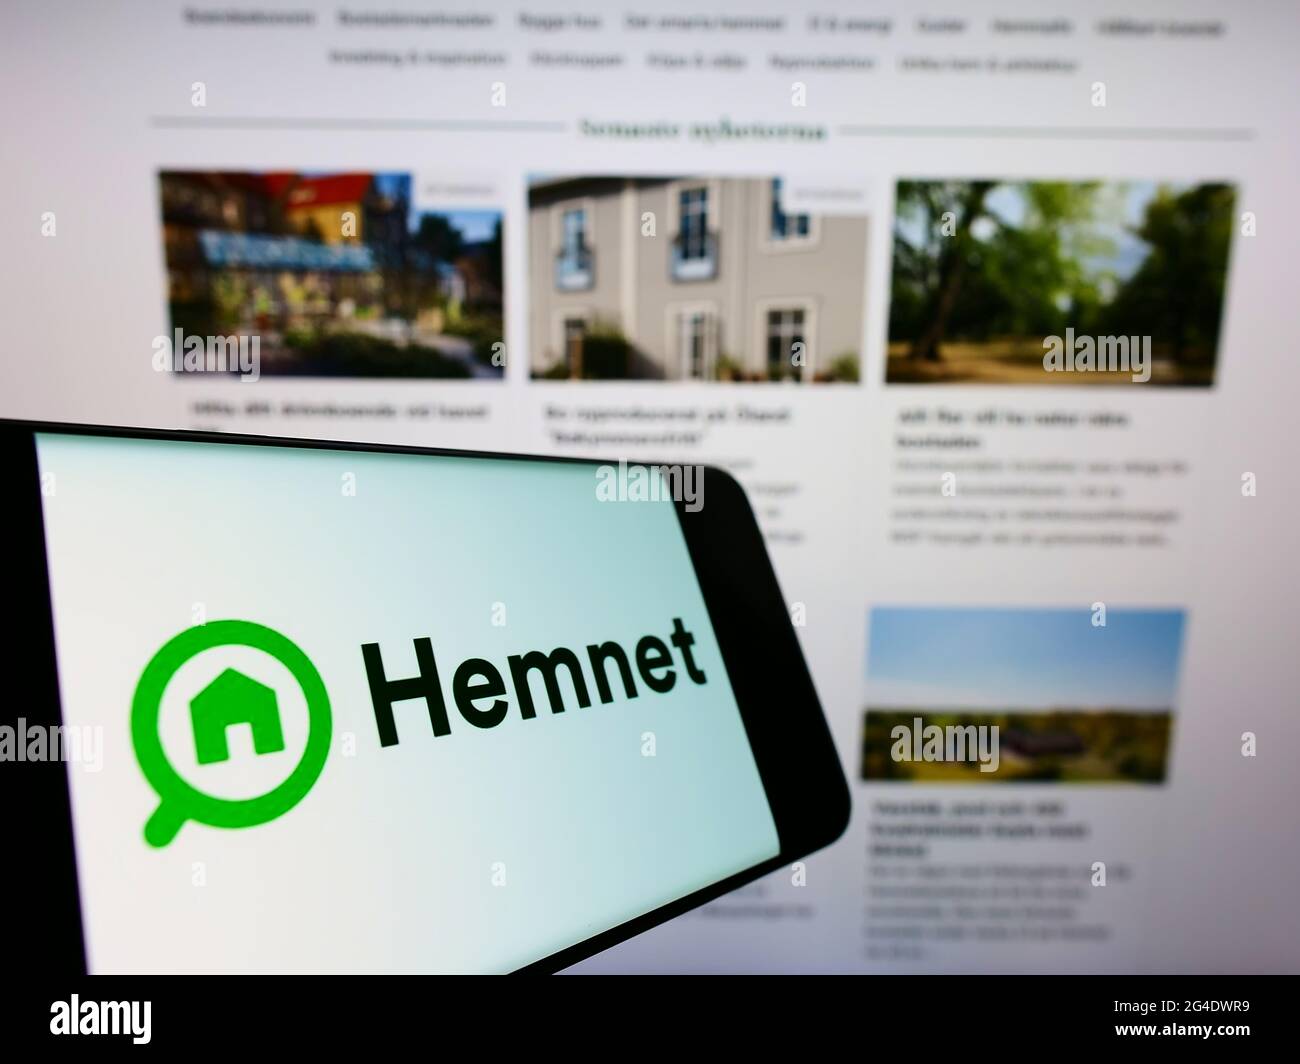 Mobile phone with logo of Swedish property platform company Hemnet AB on screen in front of business website. Focus on center-left of phone display. Stock Photo